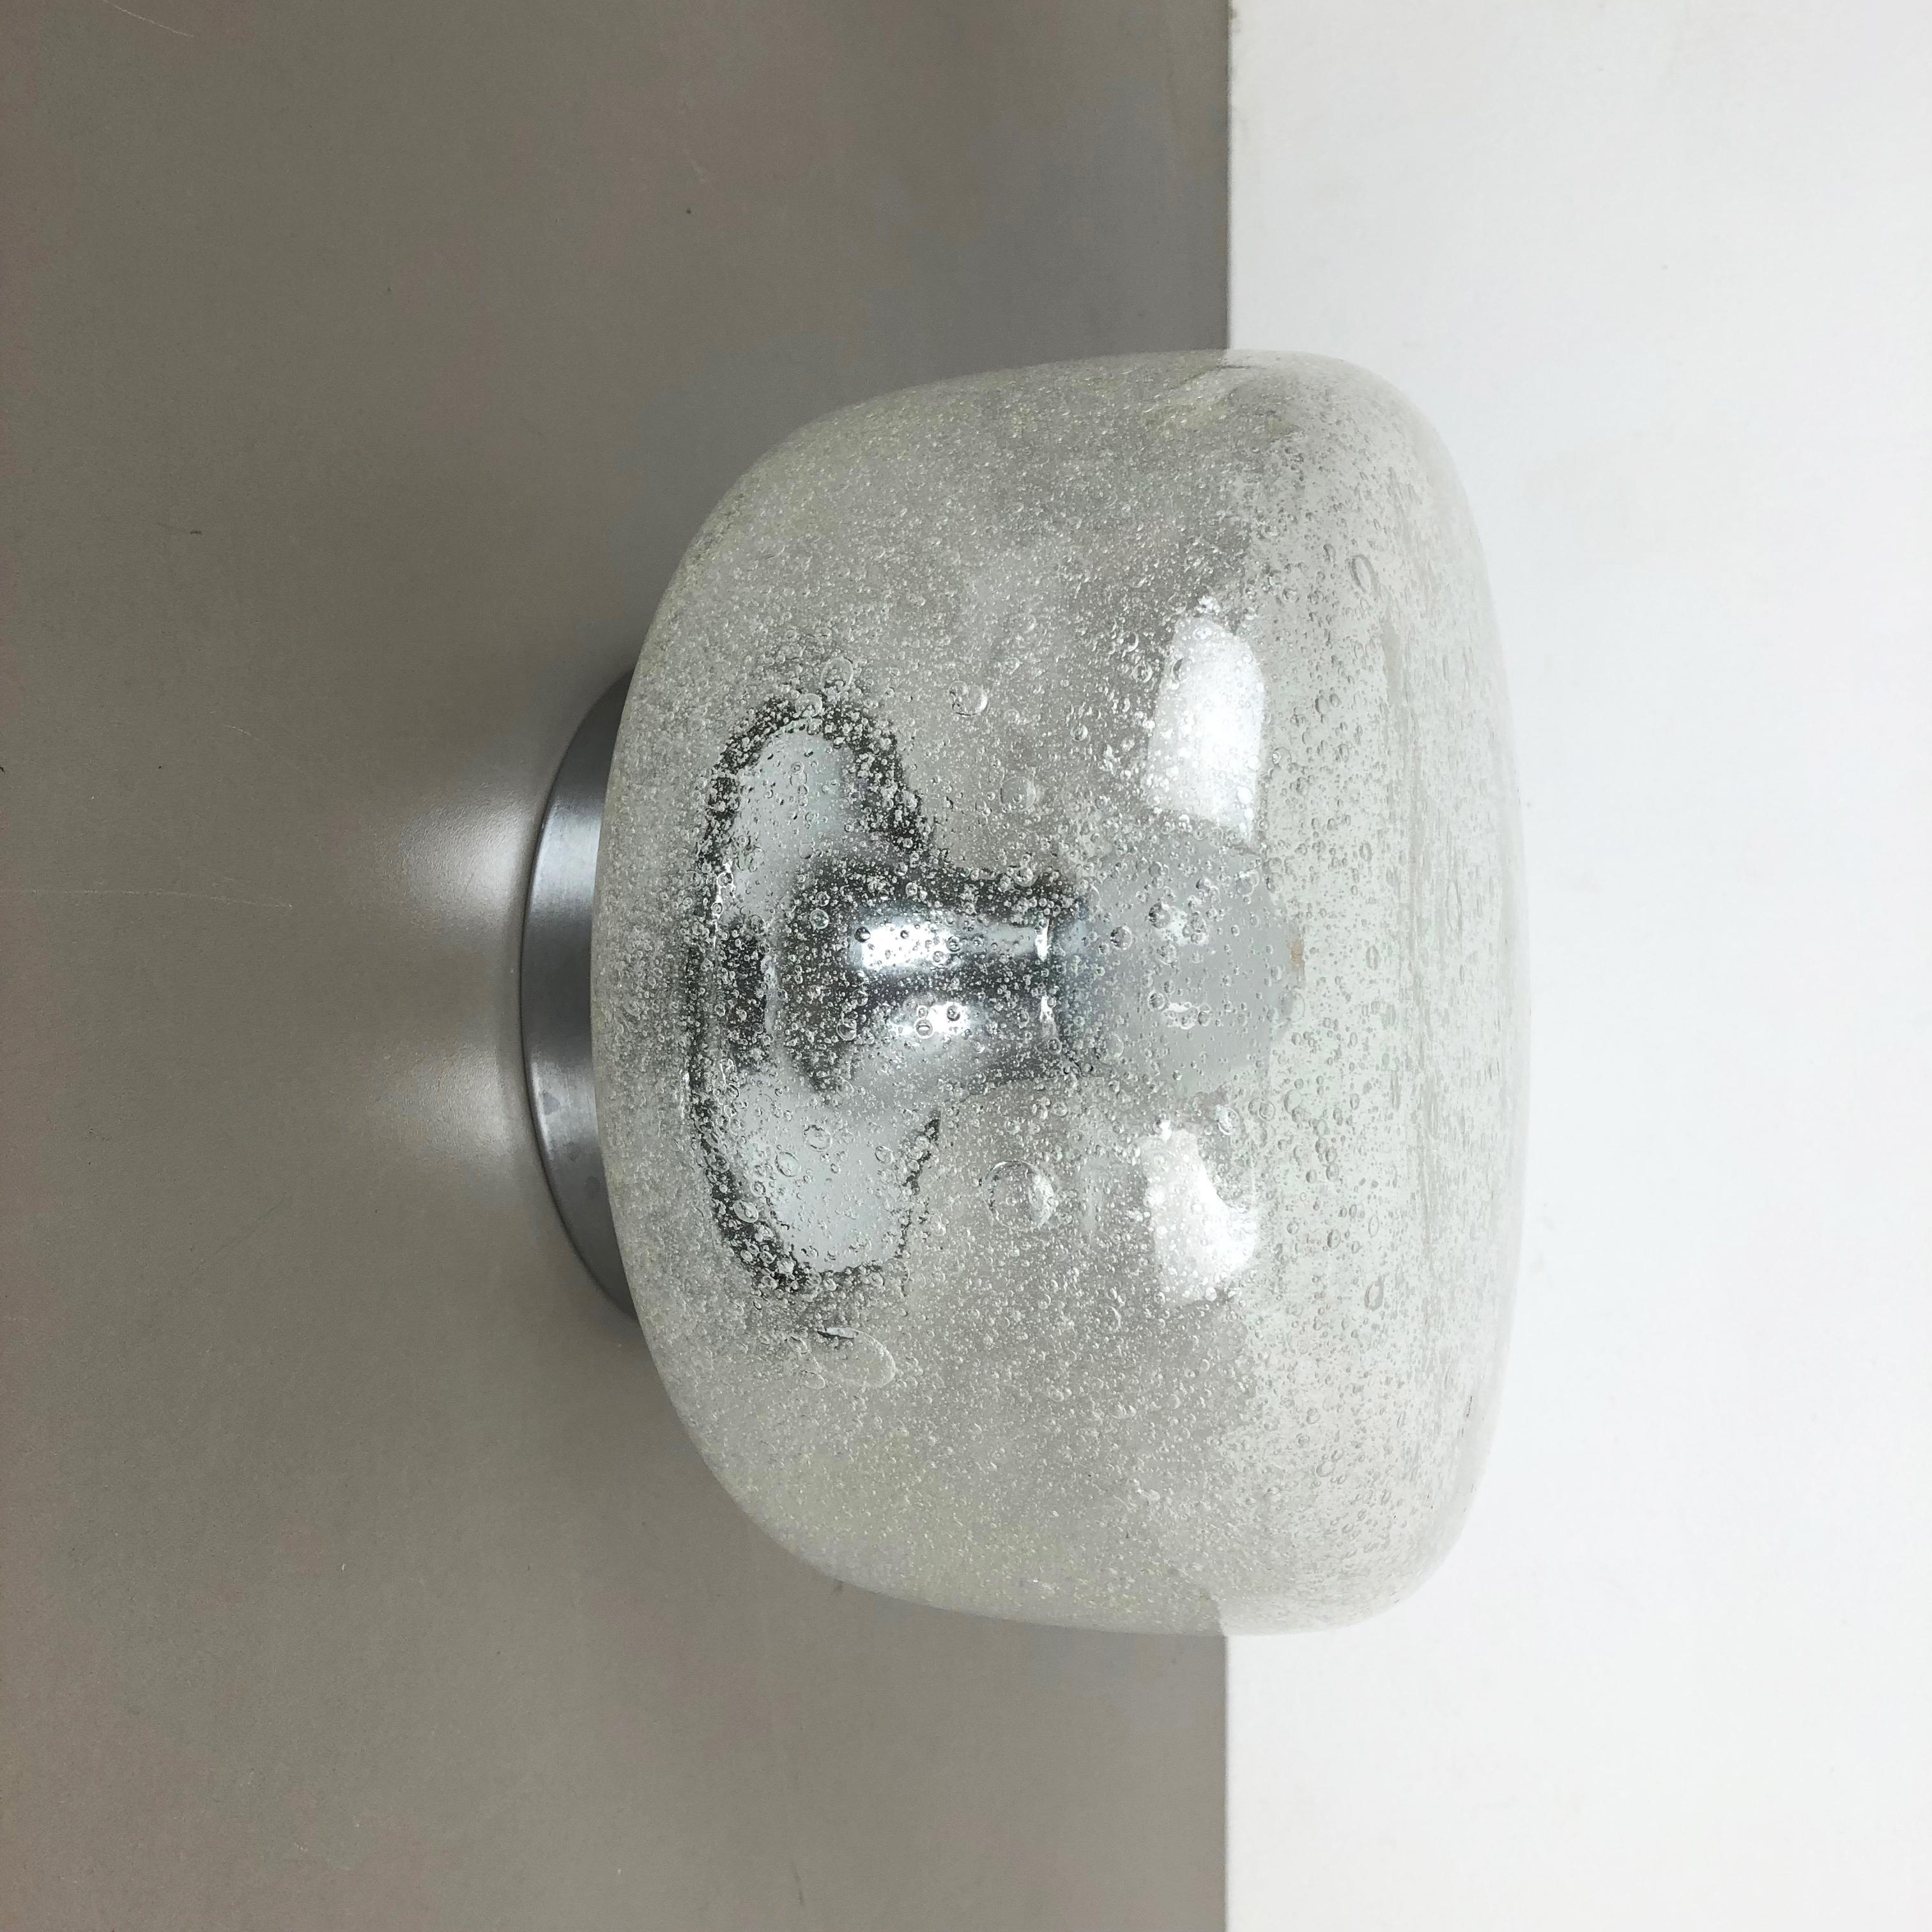 Article:

Wall light sconce


Producer:

Hillebrand Leuchten, Germany



Origin:

Germany



Age:

1970s



Original modernist german wall light made of high quality glass in cone form and clear glass bubble structure with a